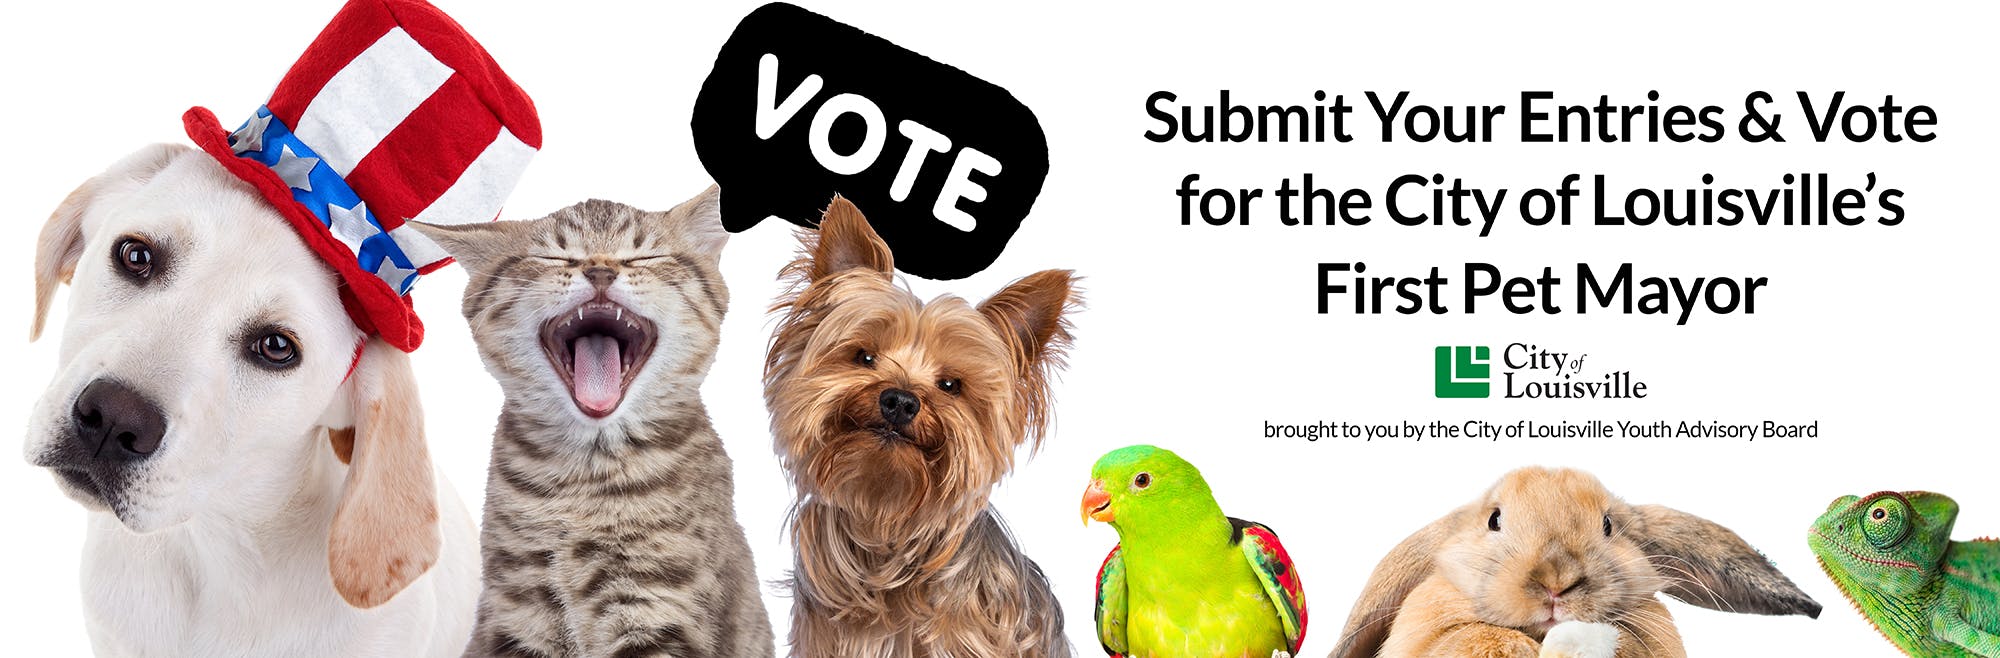 Vote for First Pet Mayor of Louisville!